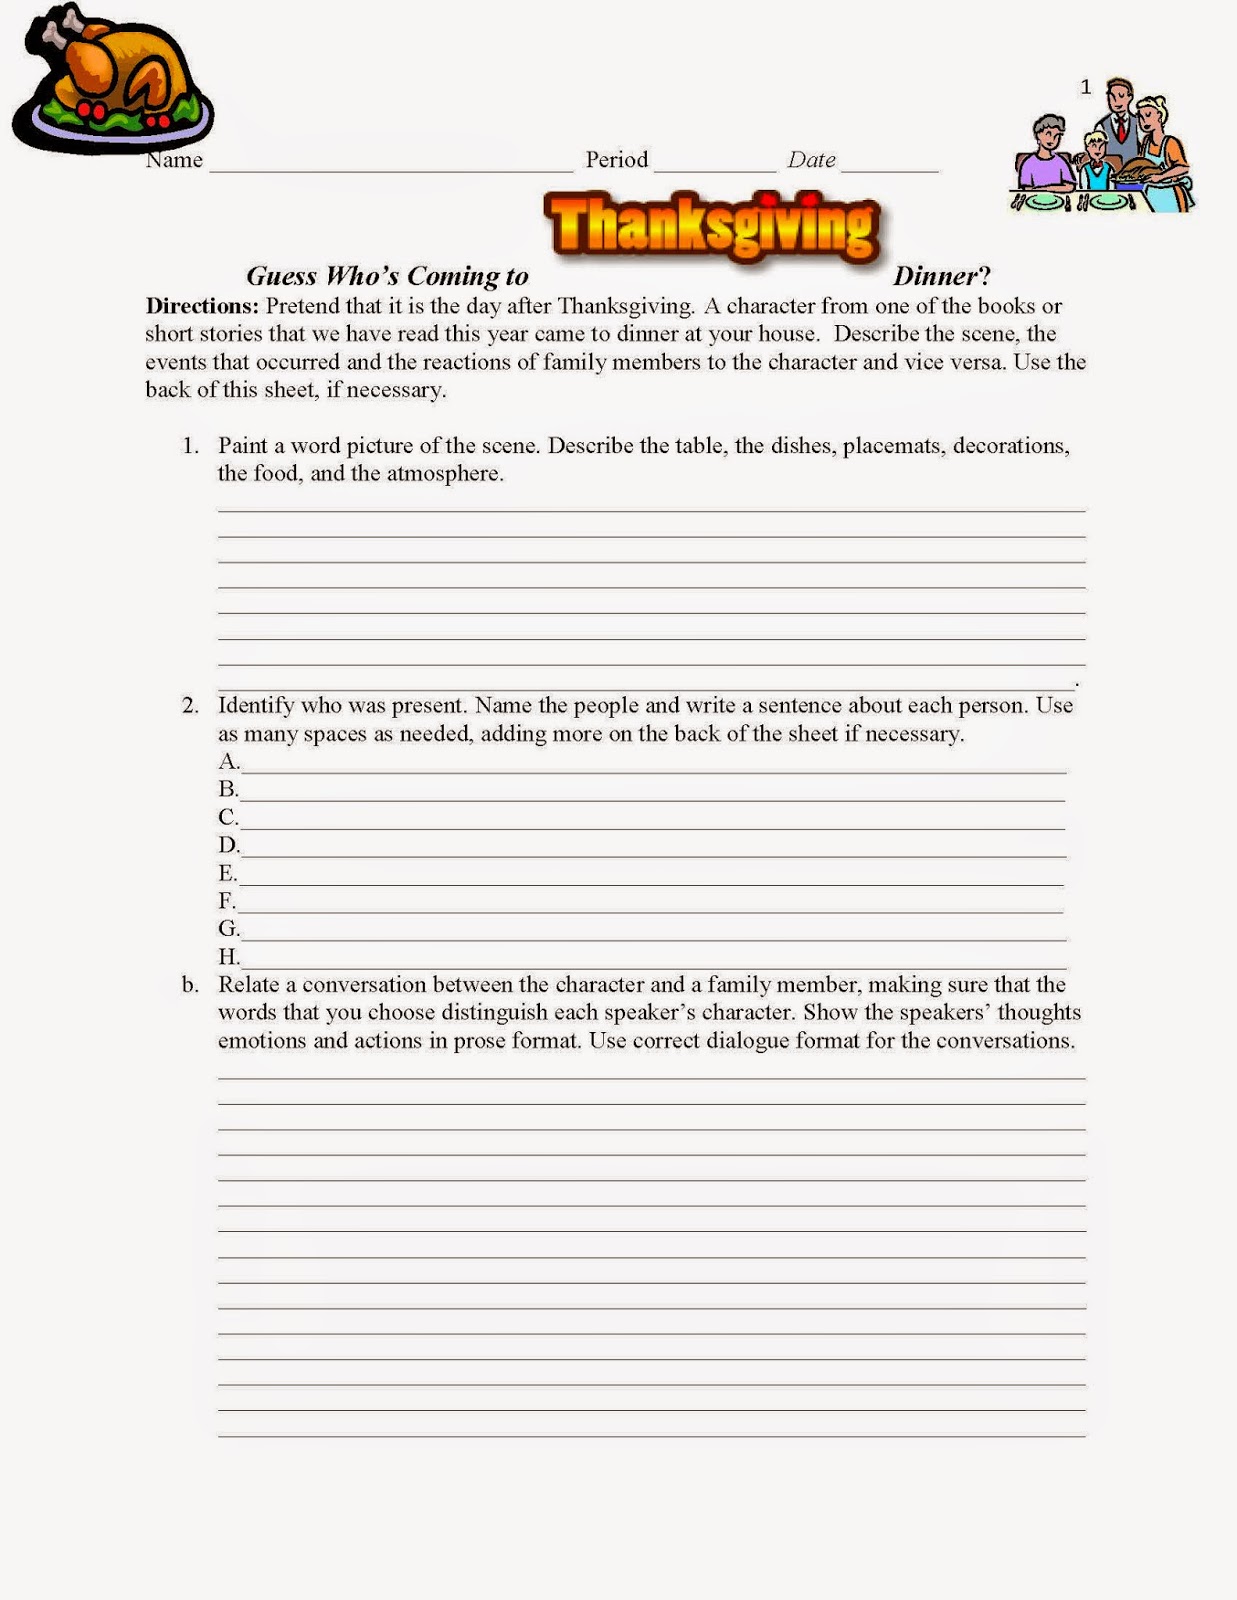 Comprehension Activity: Guess Who's Coming to Thanksgiving Dinner?